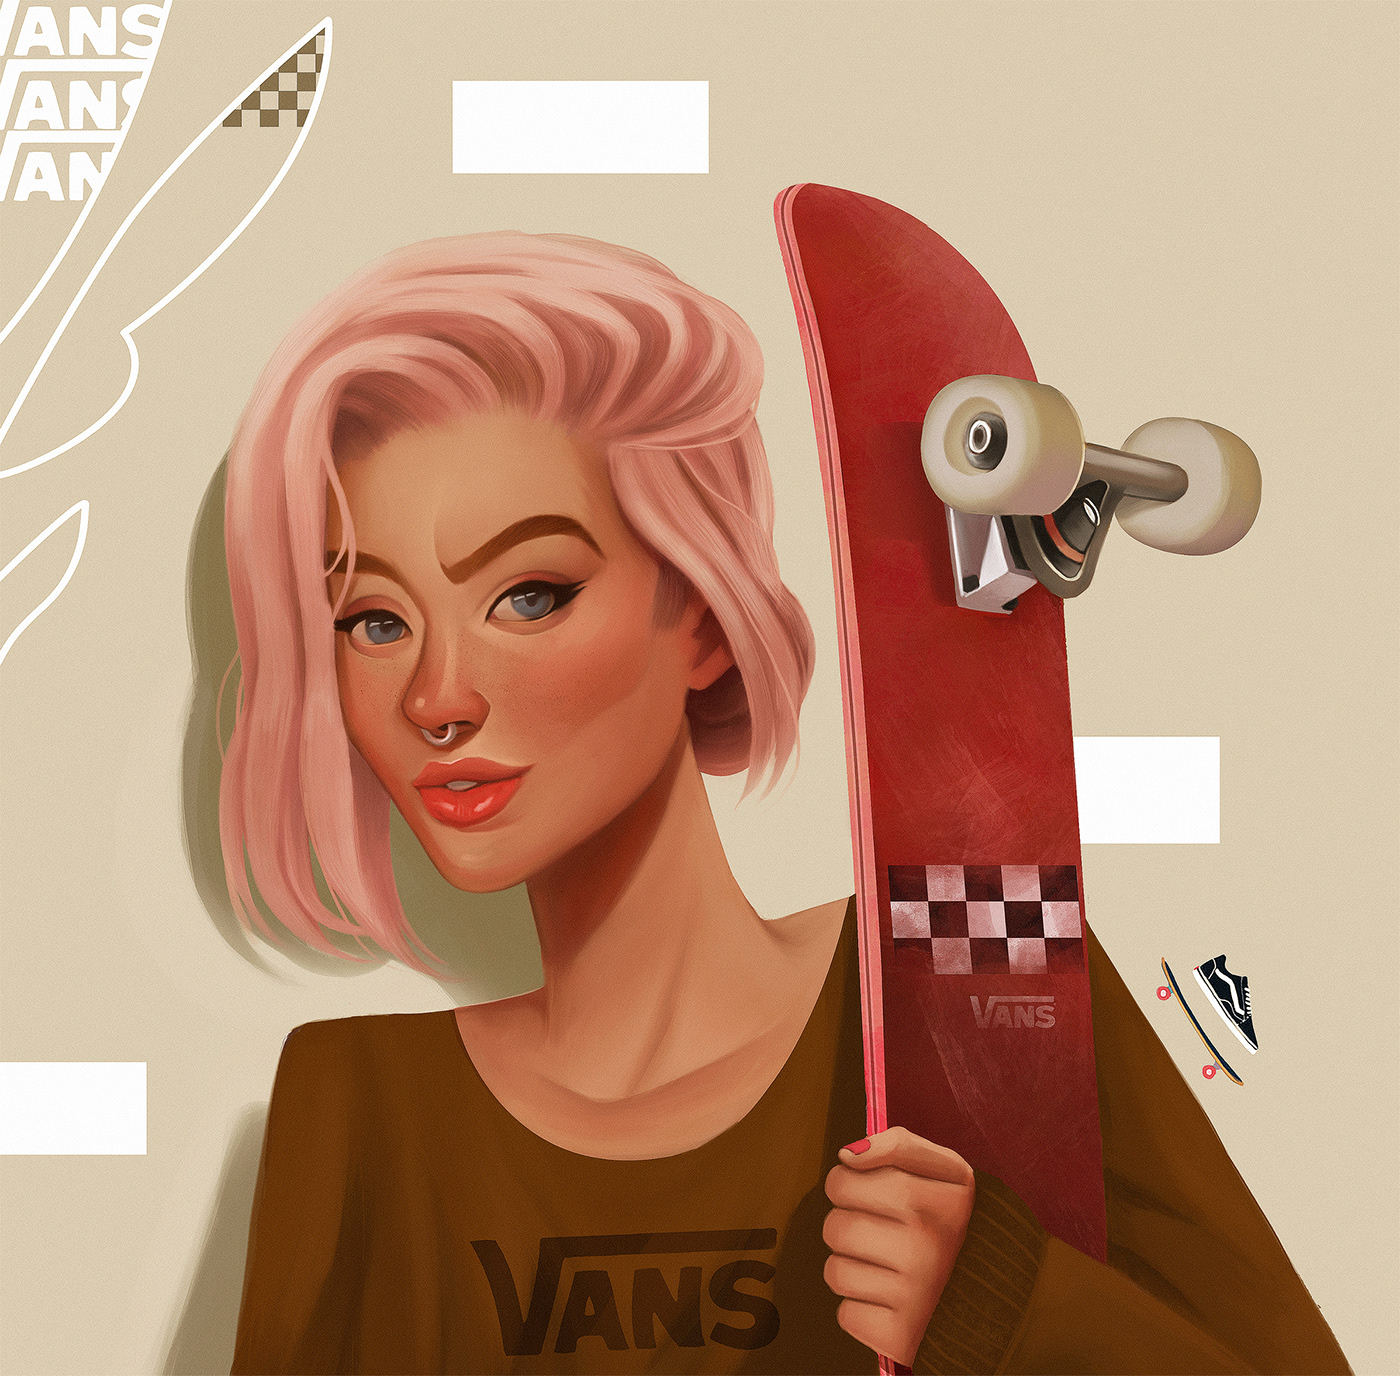 Vans design creative lifestyle Character campaign inspiration brand Illustrator bold colors